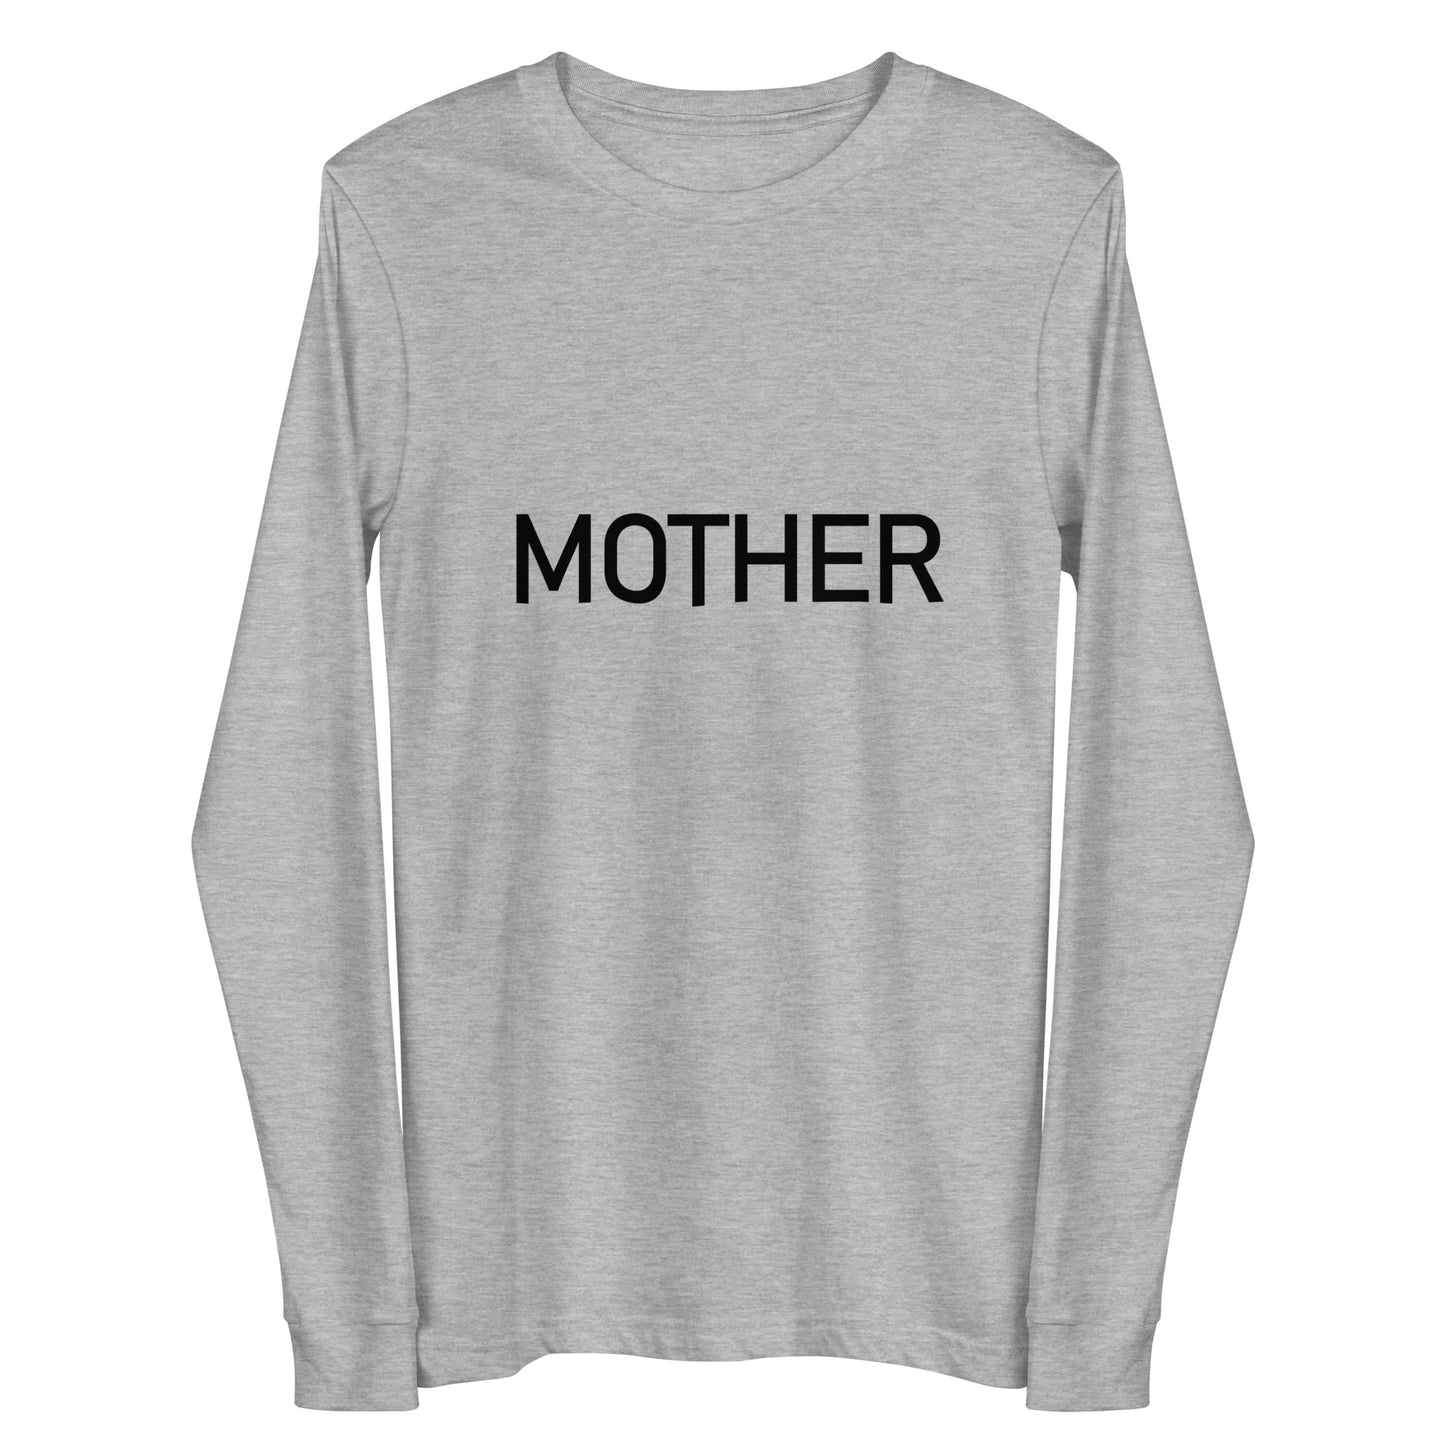 Mother - Sustainably Made Long Sleeve Tee